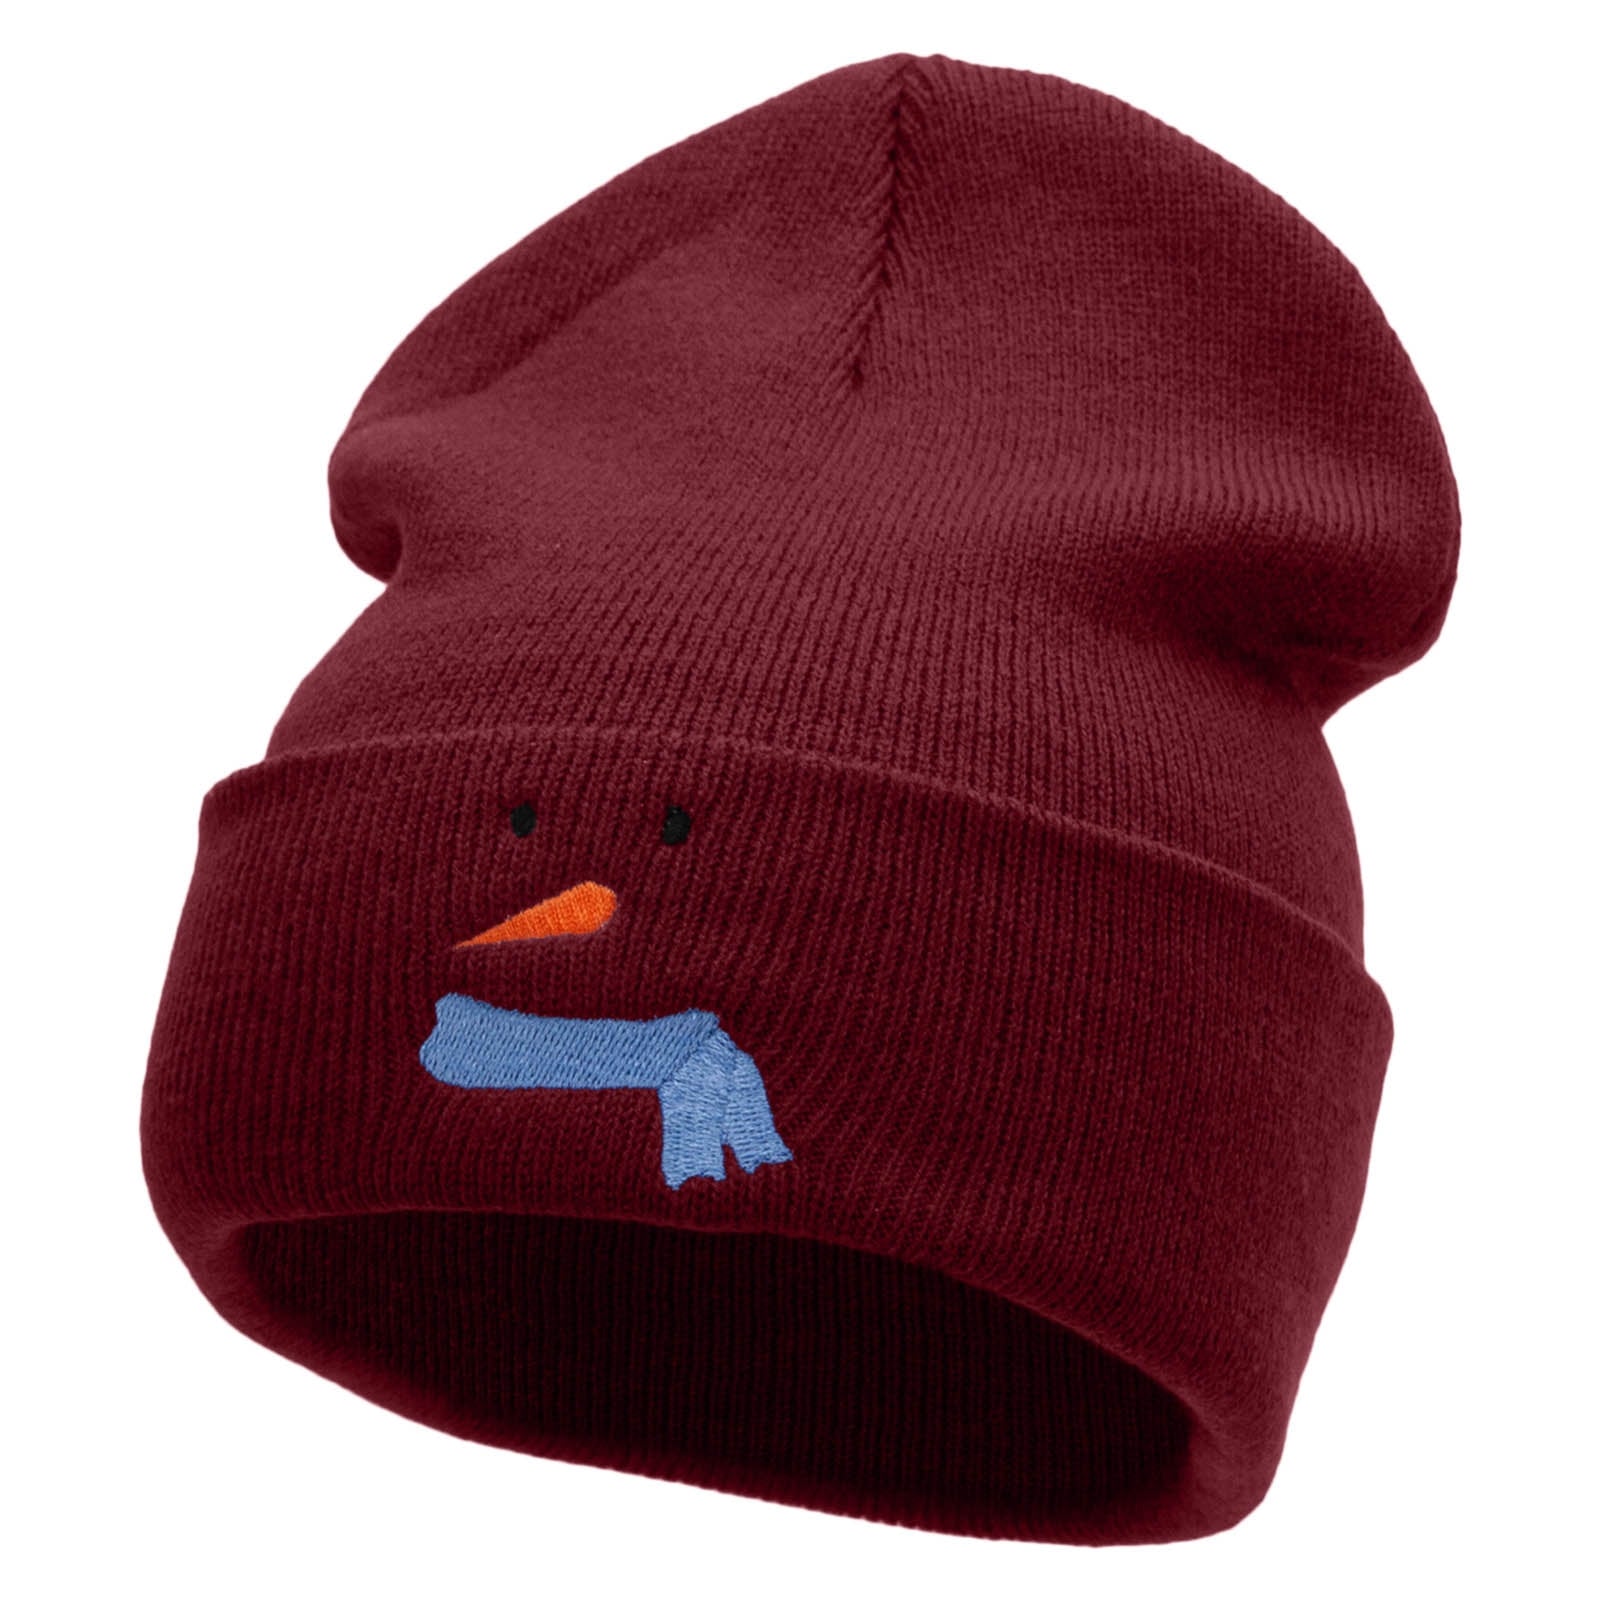 Minimal Snowman Embroidered 12 Inch Long Knitted Beanie - Maroon OSFM